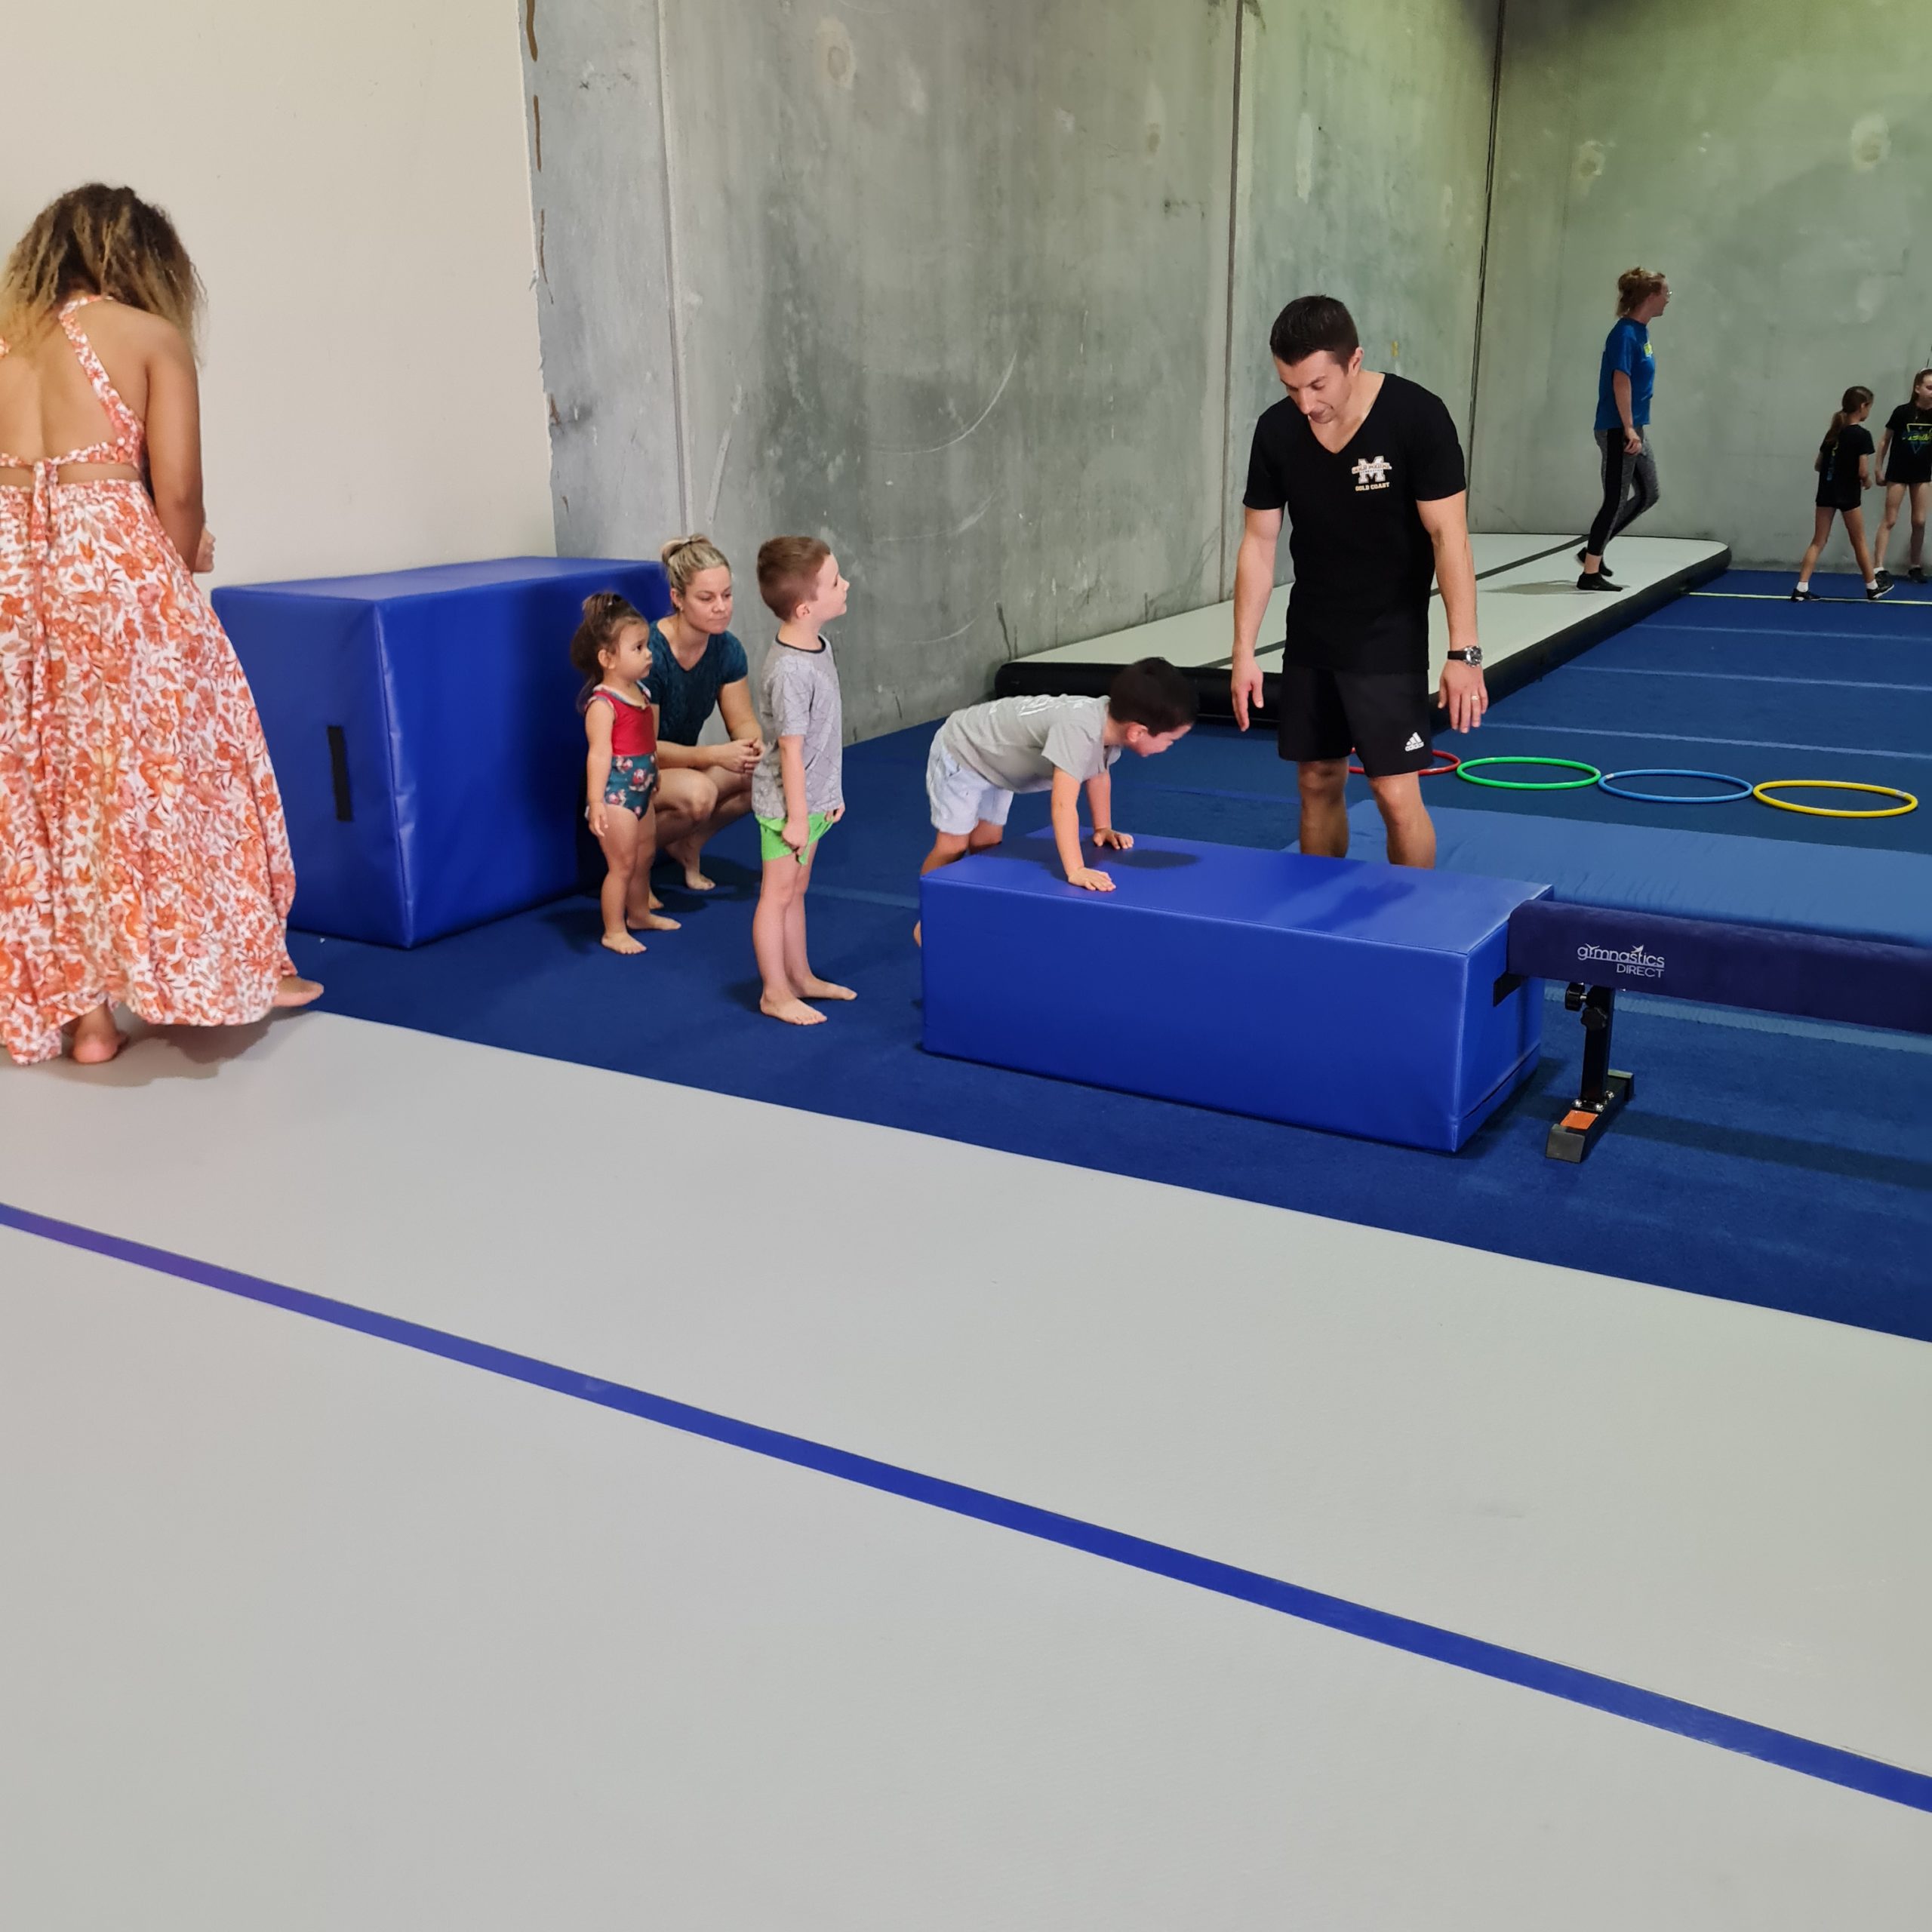 Toddler Gymnastic Classes